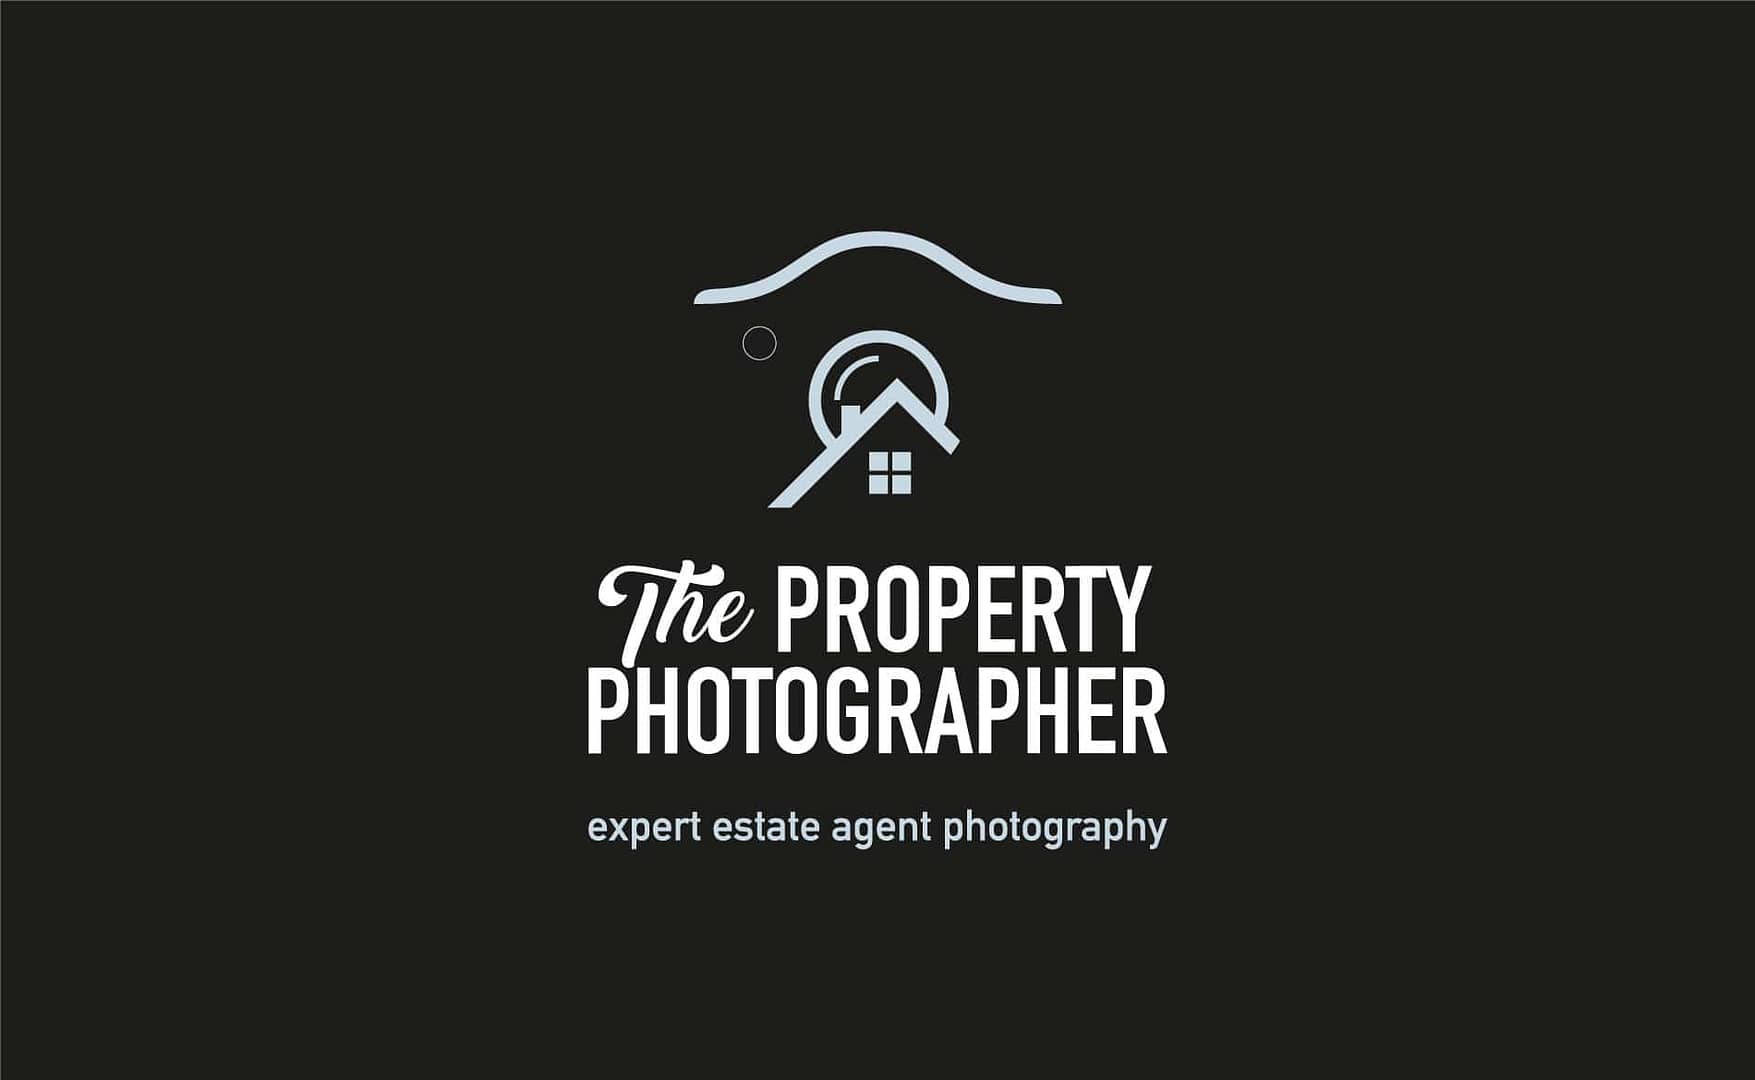 Graphic Design and Branding Services The Property Photographer Logo Design